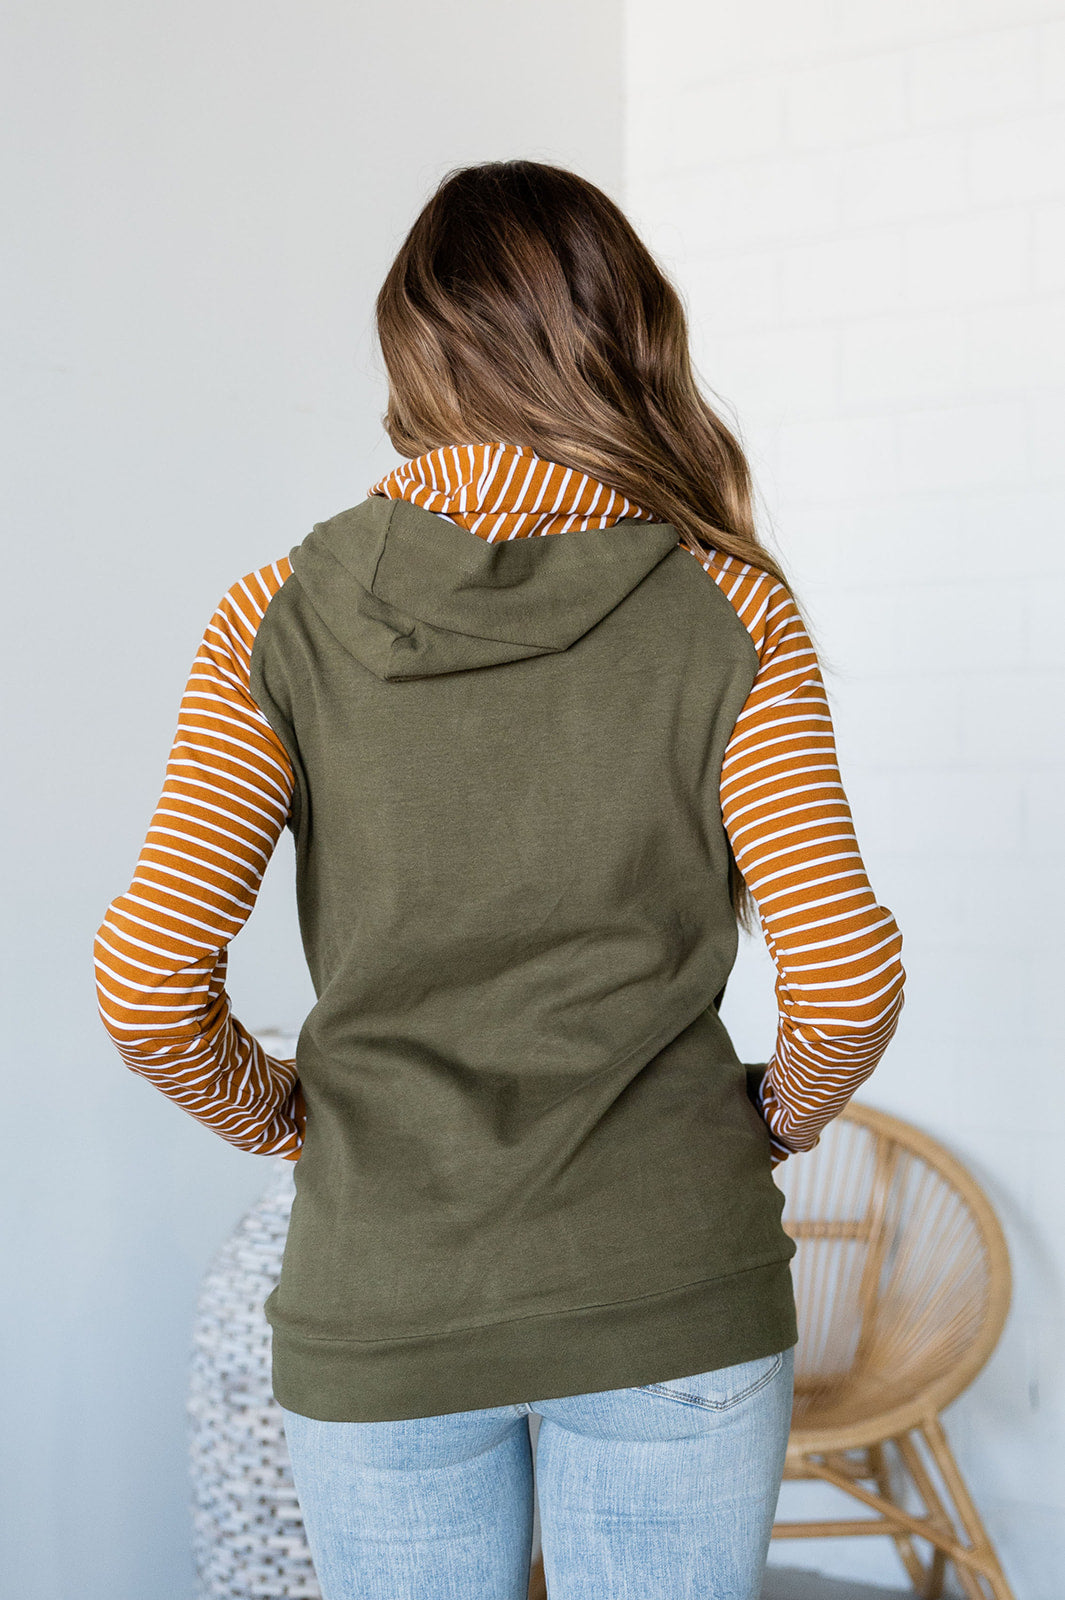 Harvest Wishes Hoodie by Ampersand Ave Final Sale